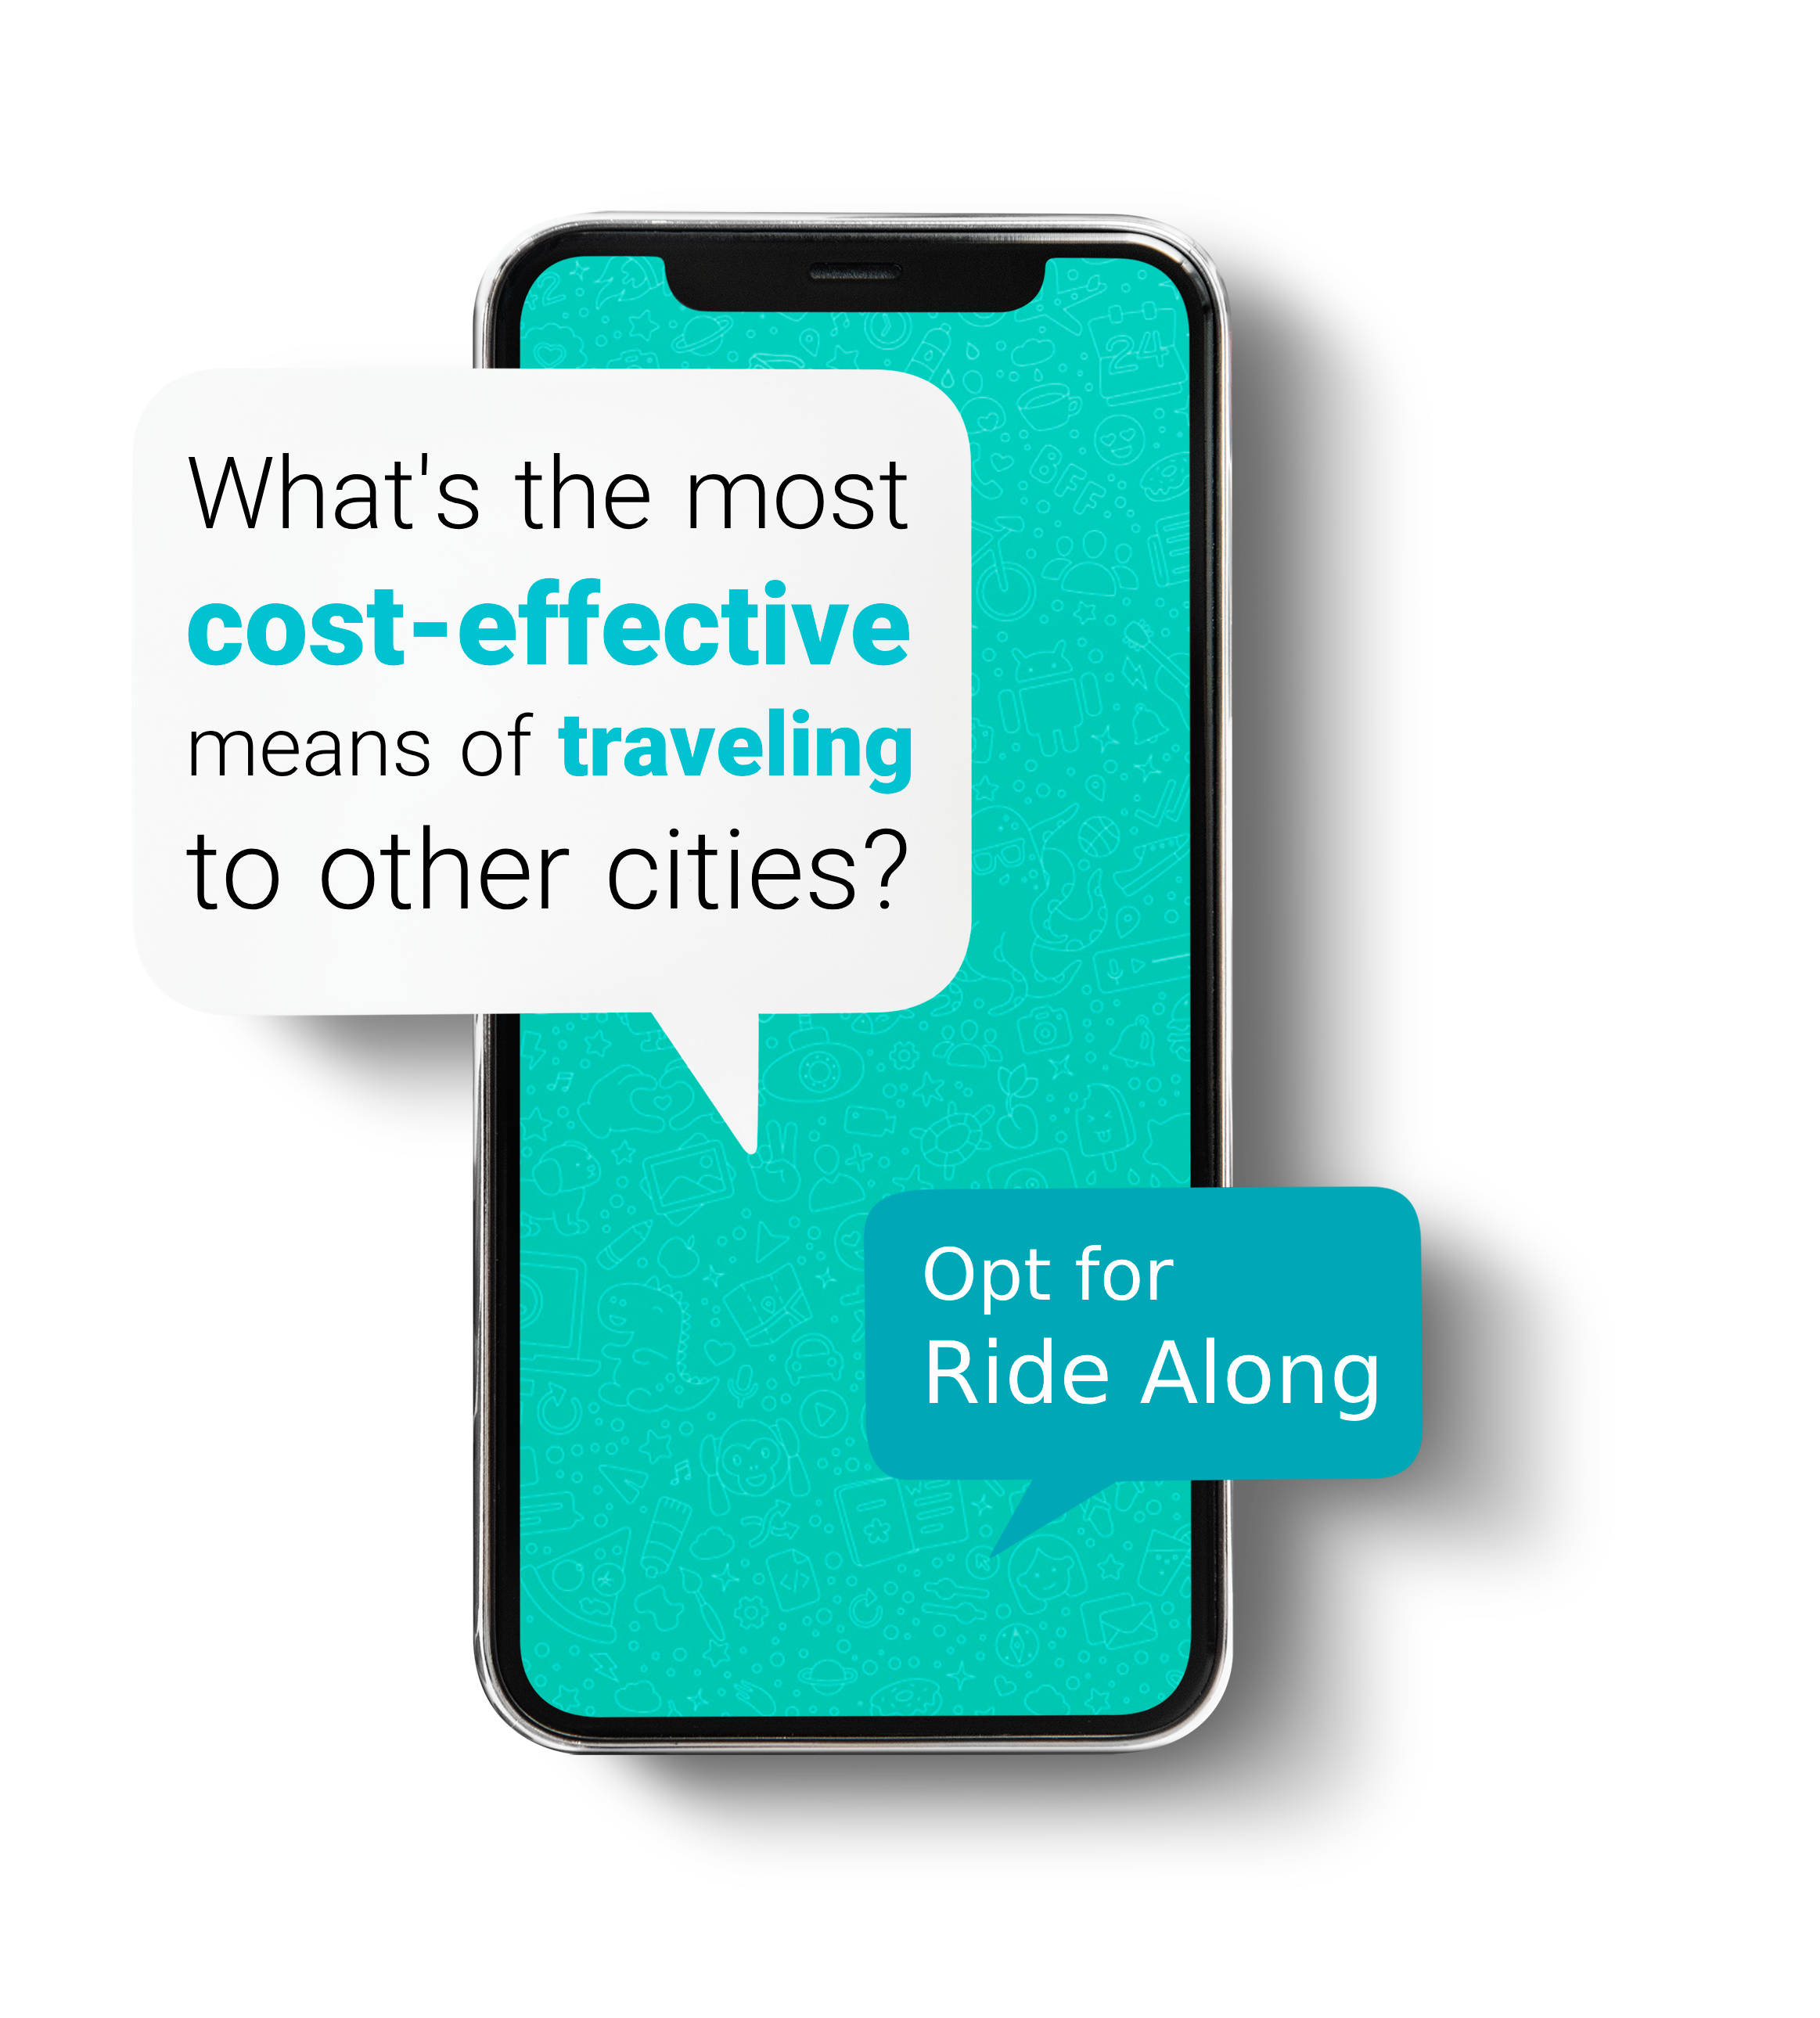 What's the most cost-effective means of traveling to other cities?